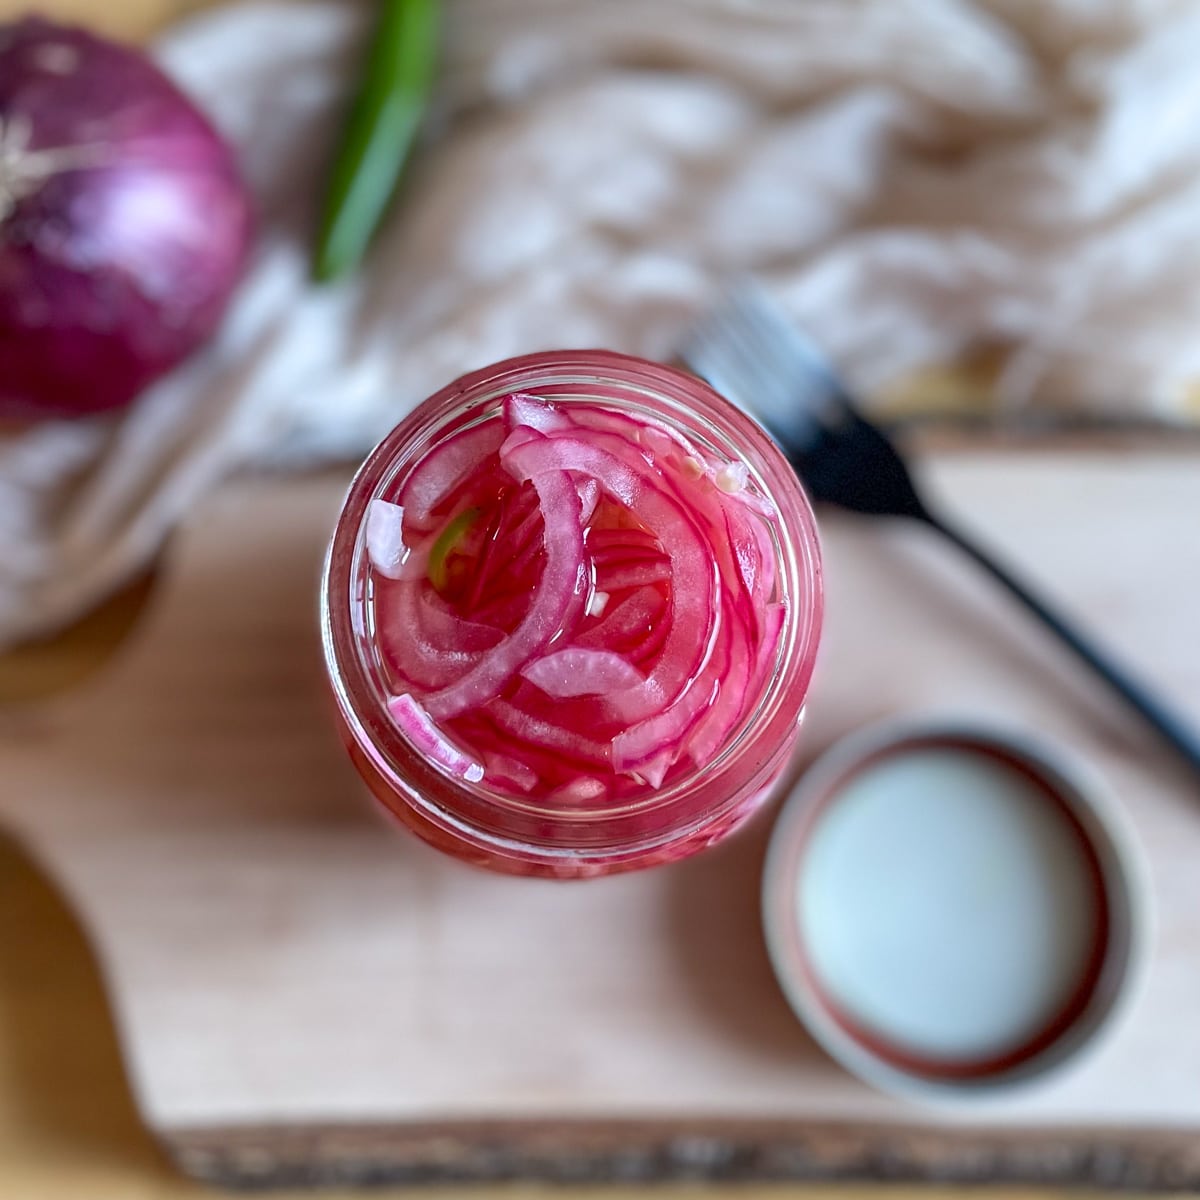 Sliced red spicy pickled onions are shown in a glass jar on a rustic wood cutting board with a lid, a black fork, a white linen, a red onion, and a Serrano pepper in the background.